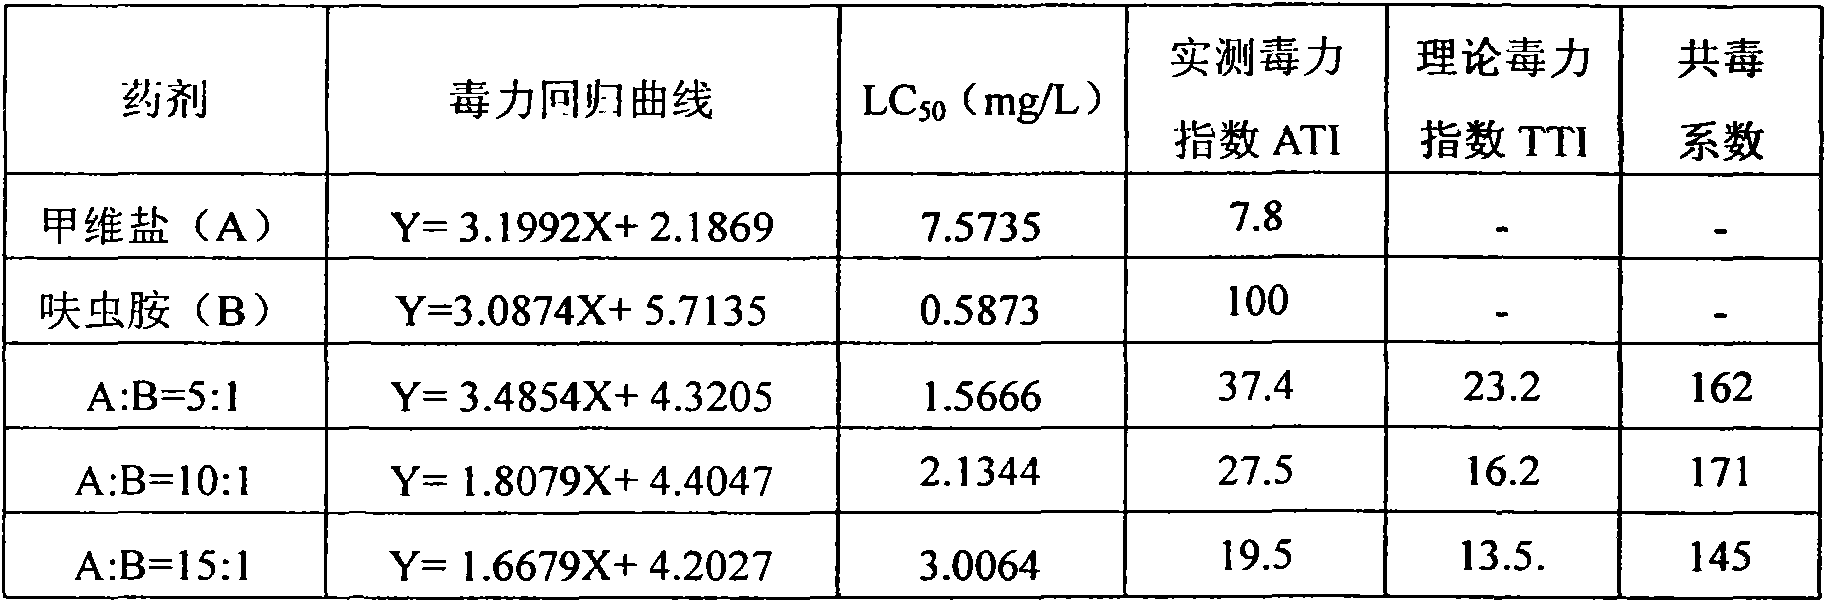 Composite insecticide composition containing dinotefuran and emamectin benzoate and purpose thereof